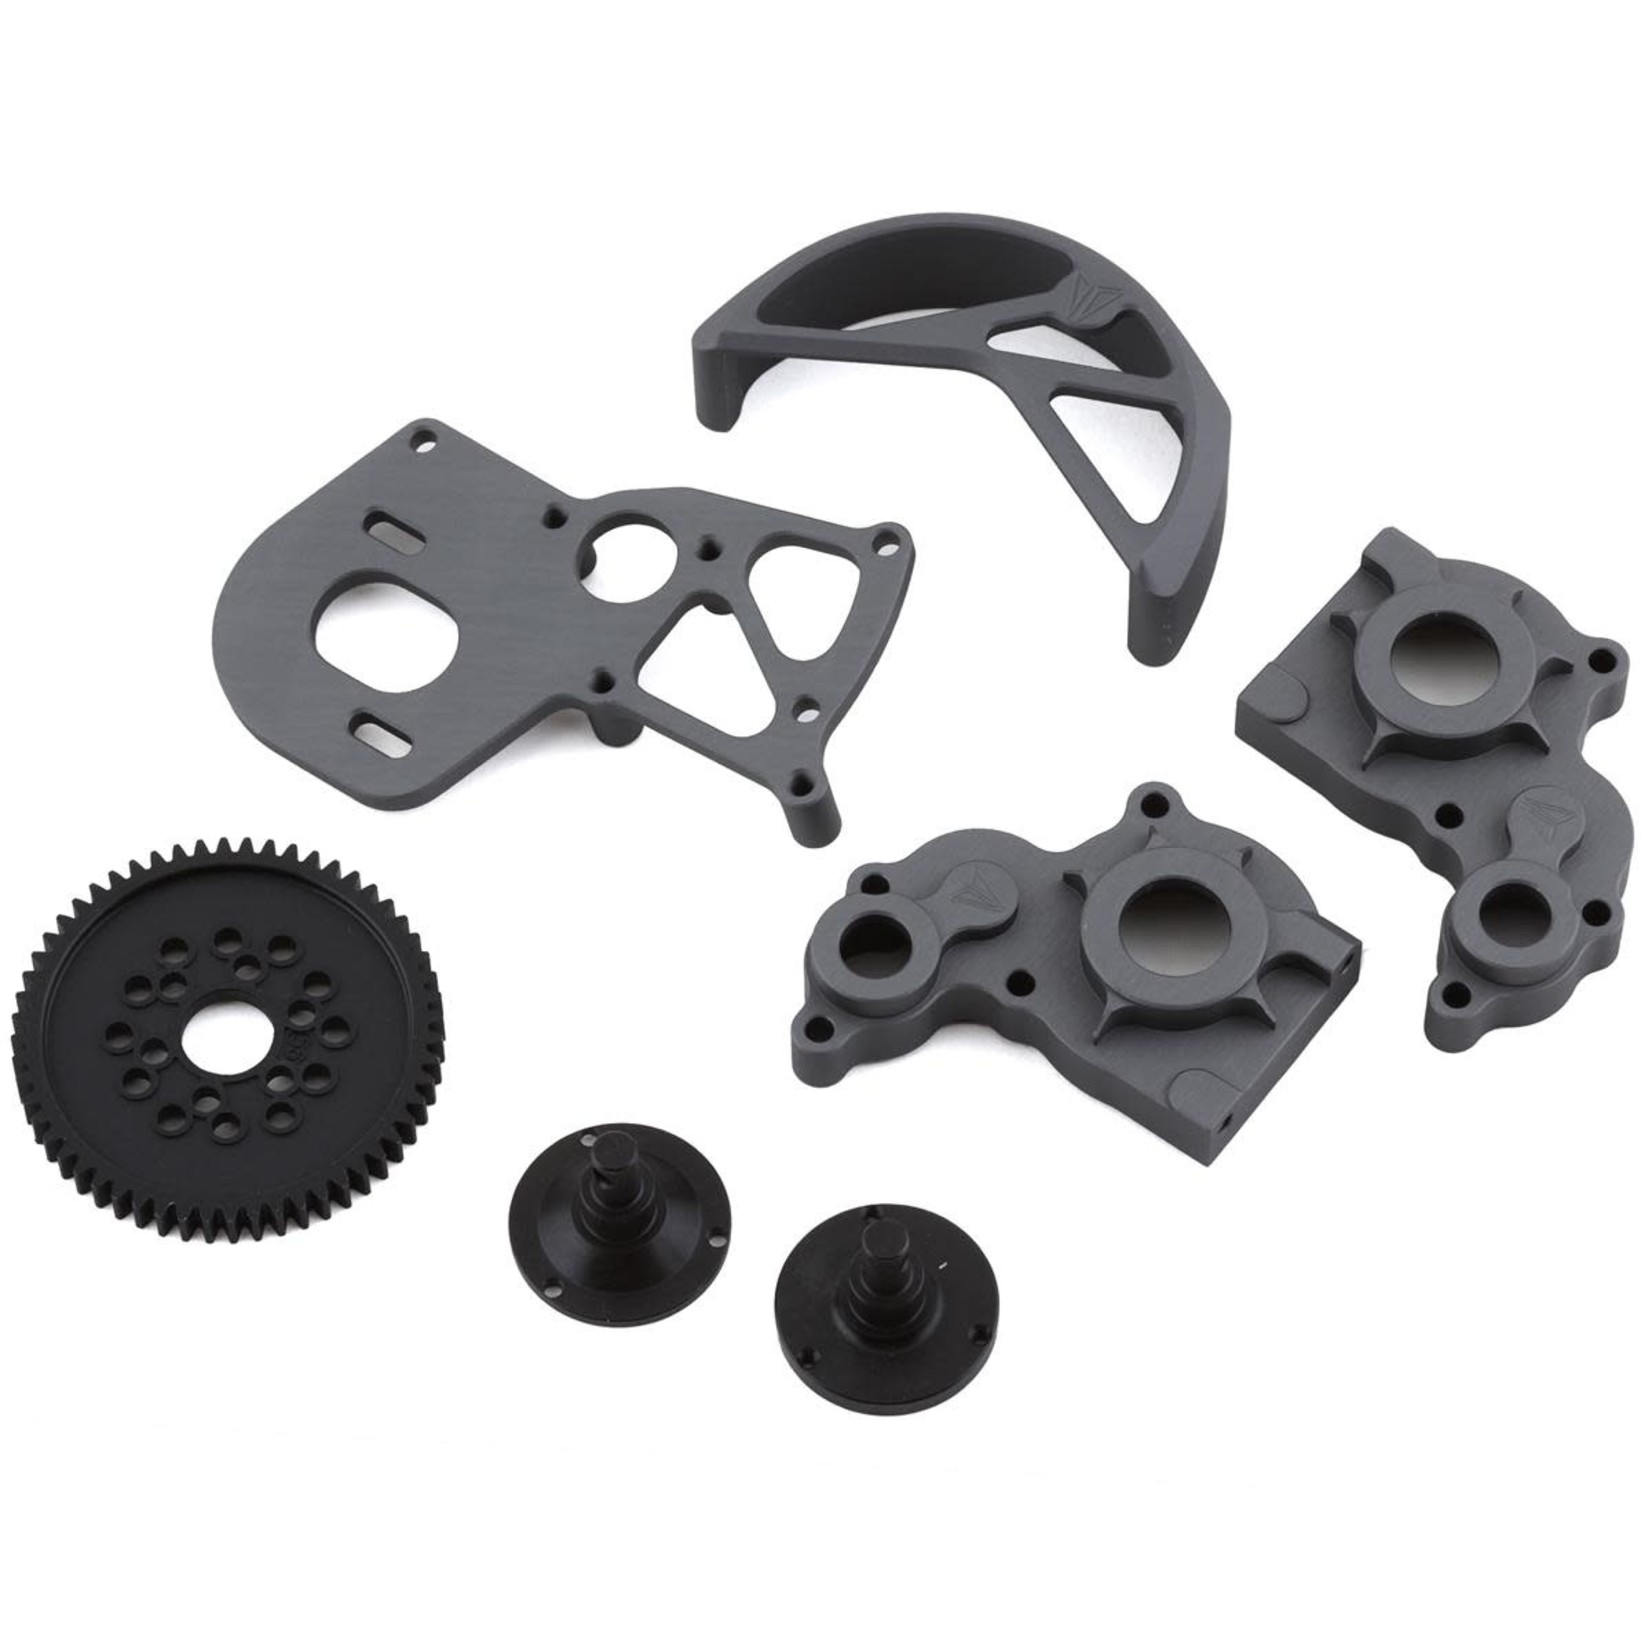 Vanquish Products Vanquish Products 3-Gear Transmission Kit (Grey) #VPS01203